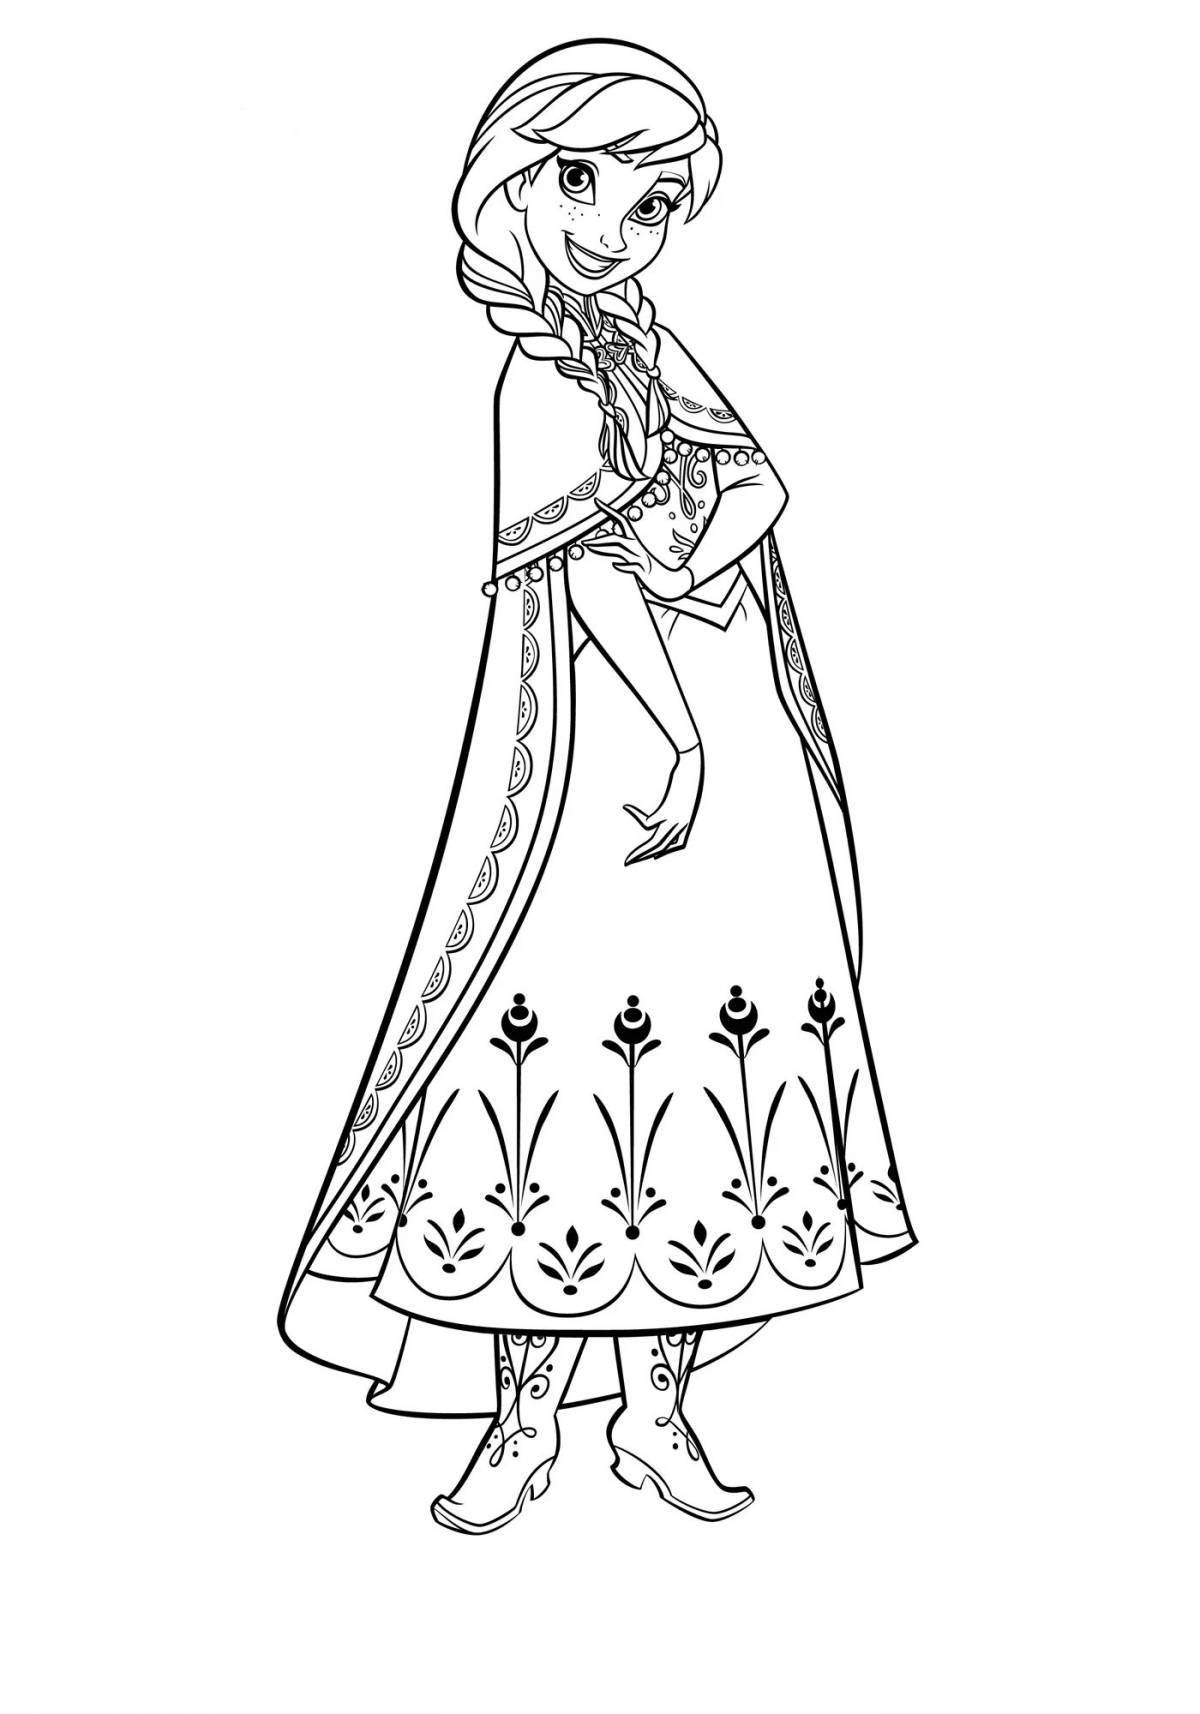 Awesome princess anna coloring page